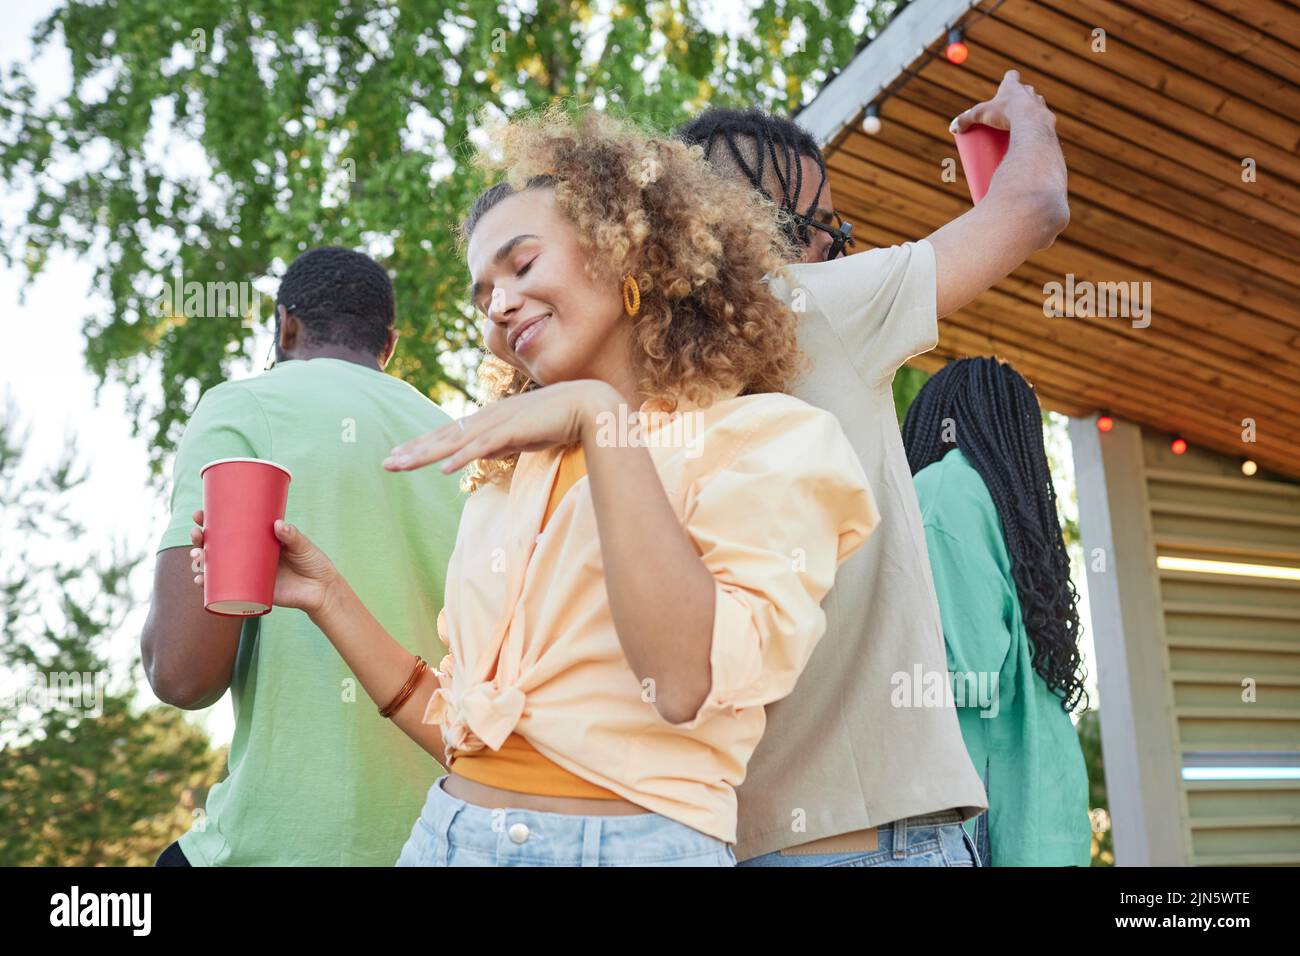 Waist p portrait of carefree young woman dancing outdoors at Summer party Stock Photo